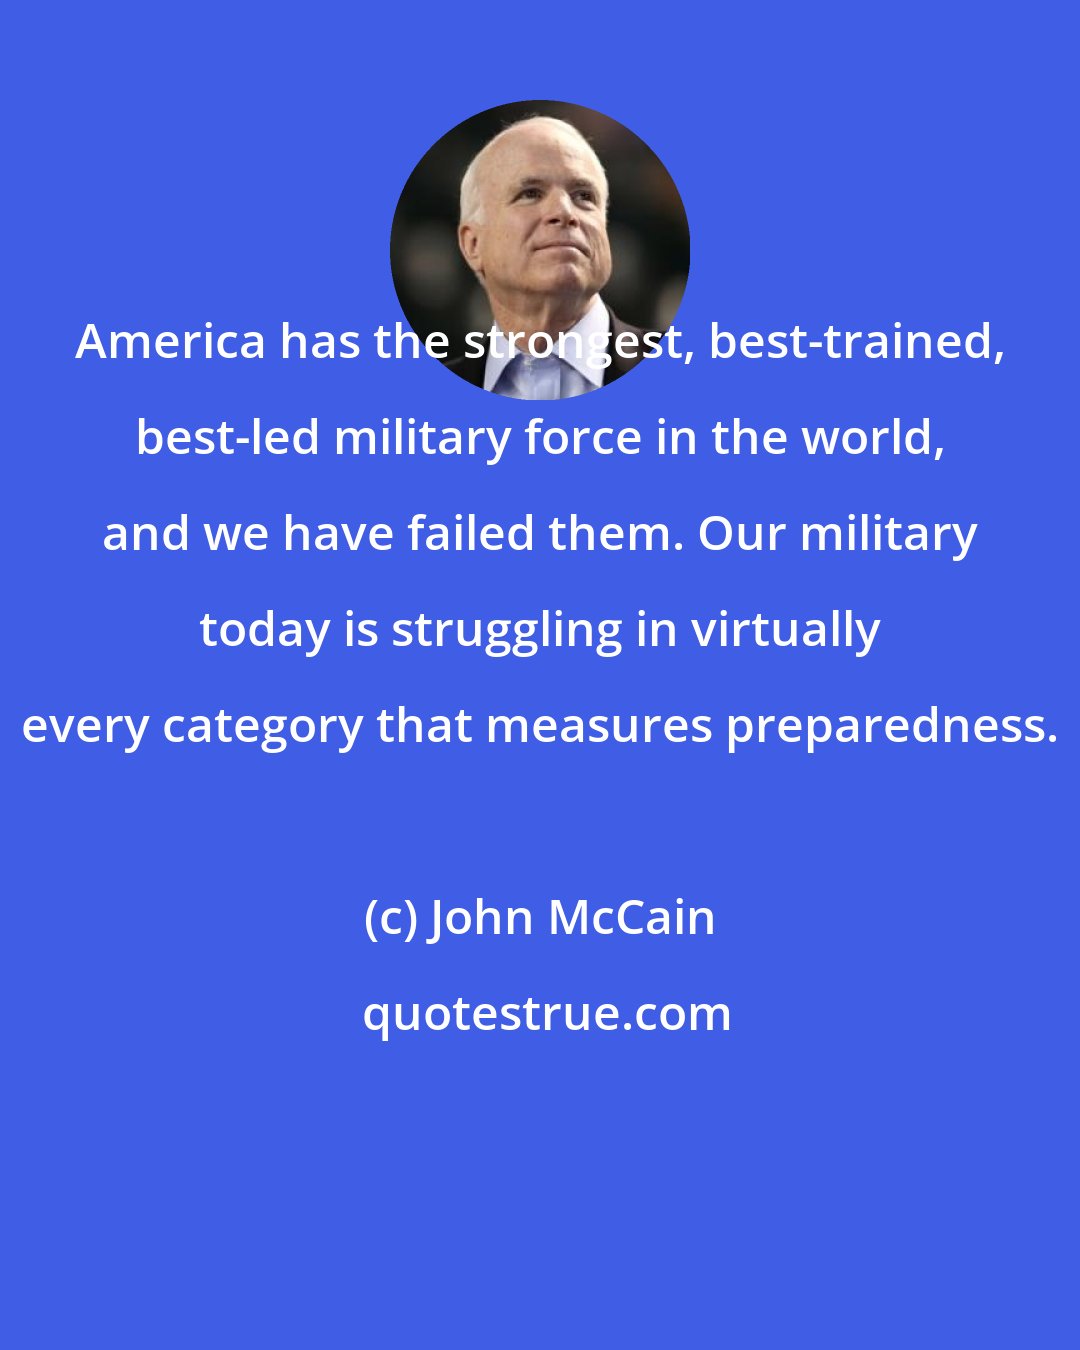 John McCain: America has the strongest, best-trained, best-led military force in the world, and we have failed them. Our military today is struggling in virtually every category that measures preparedness.